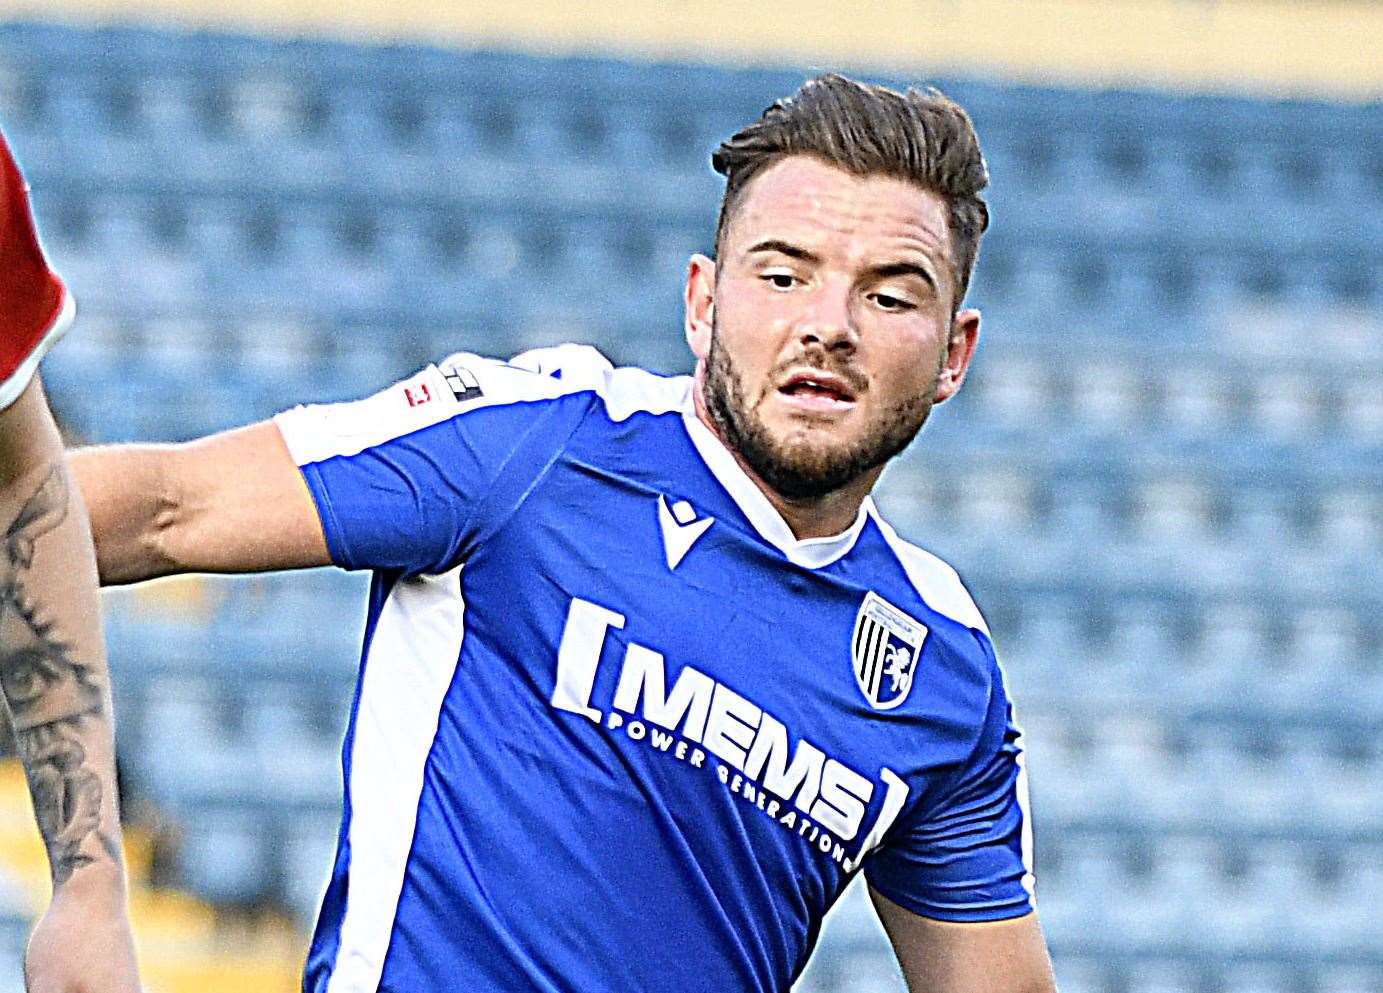 Alex MacDonald captained the Gills for their EFL Trophy match at Ipswich